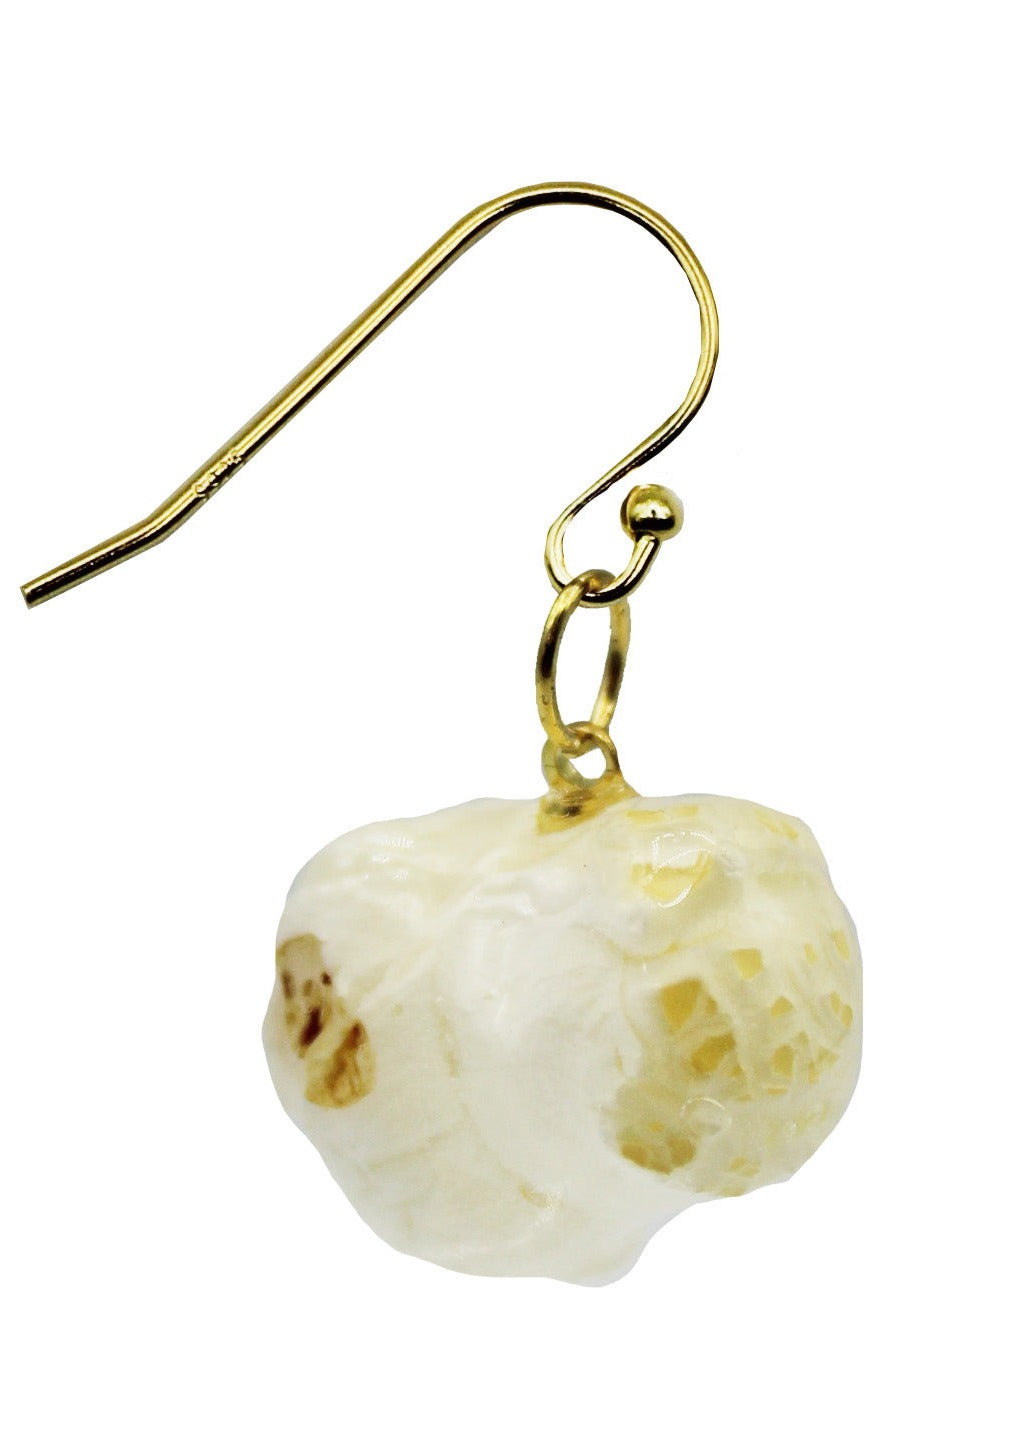 Resin Coated Piece of Popcorn on a French Hook Earring